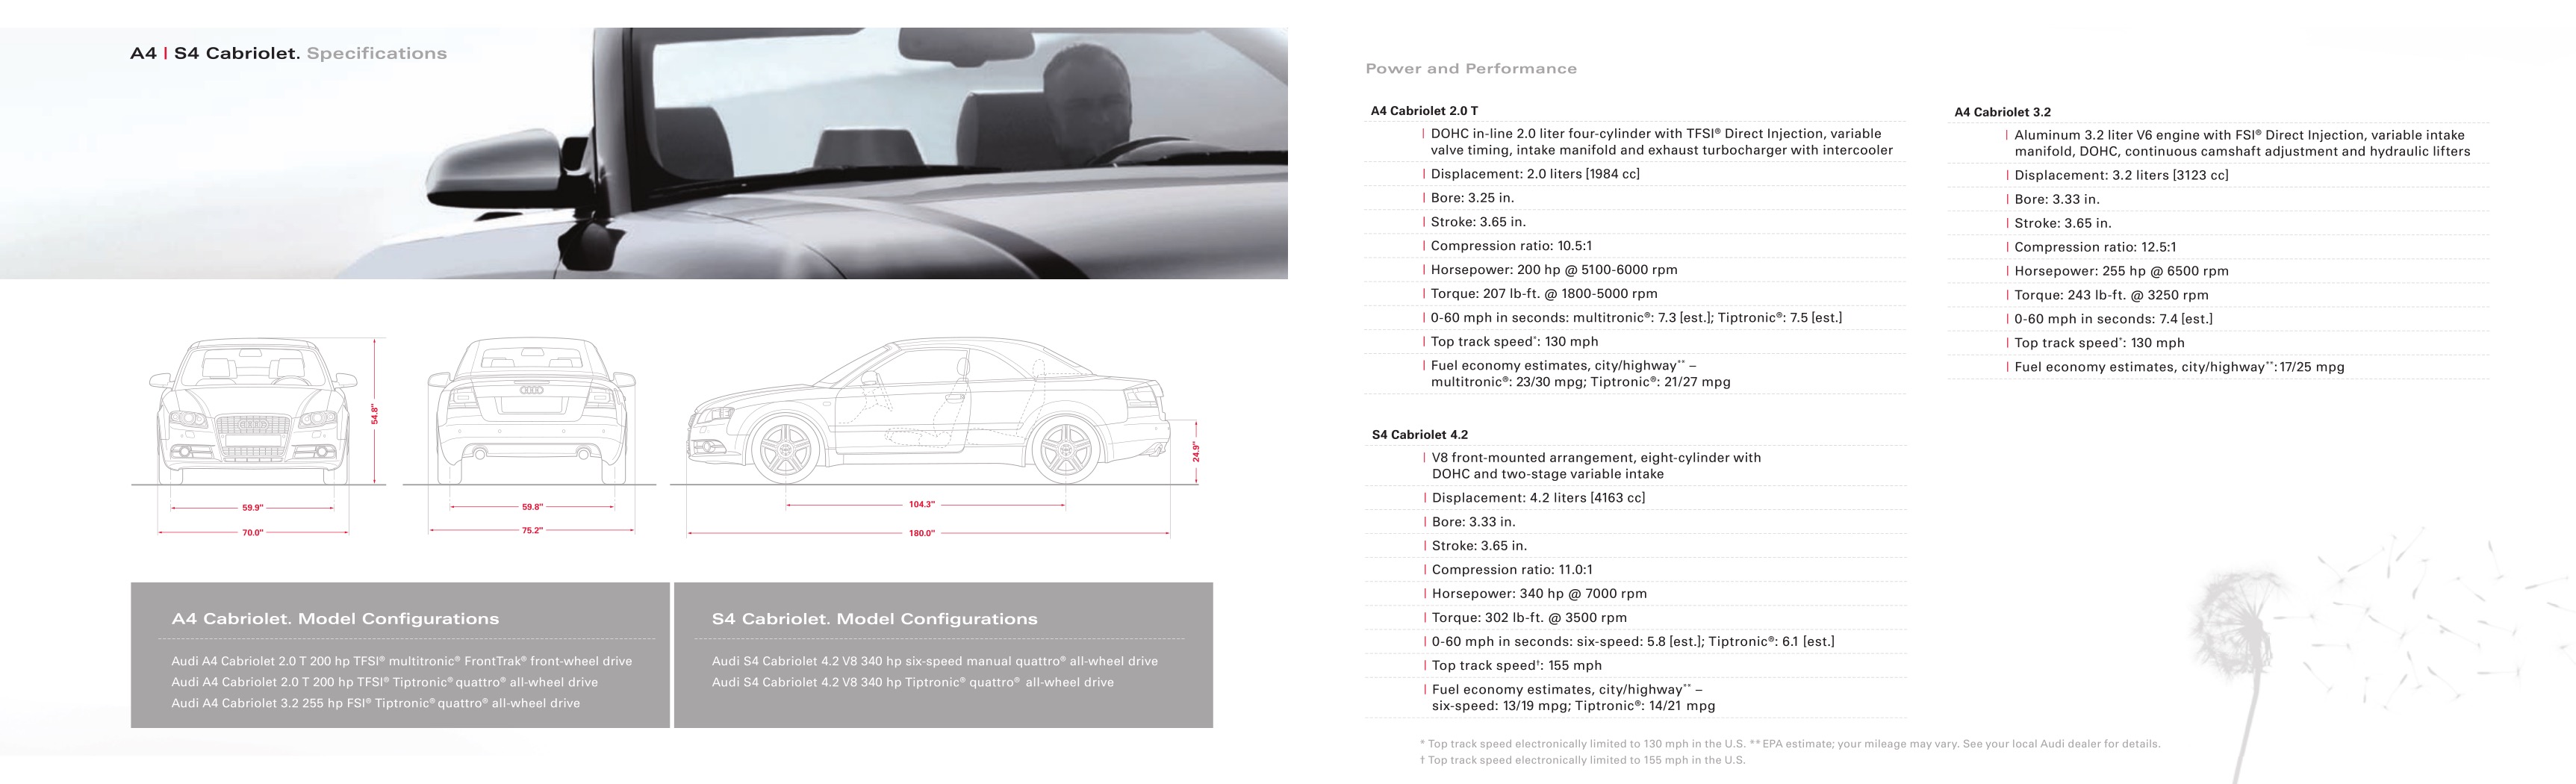 2009 Audi A4 Convertible Brochure Page 13